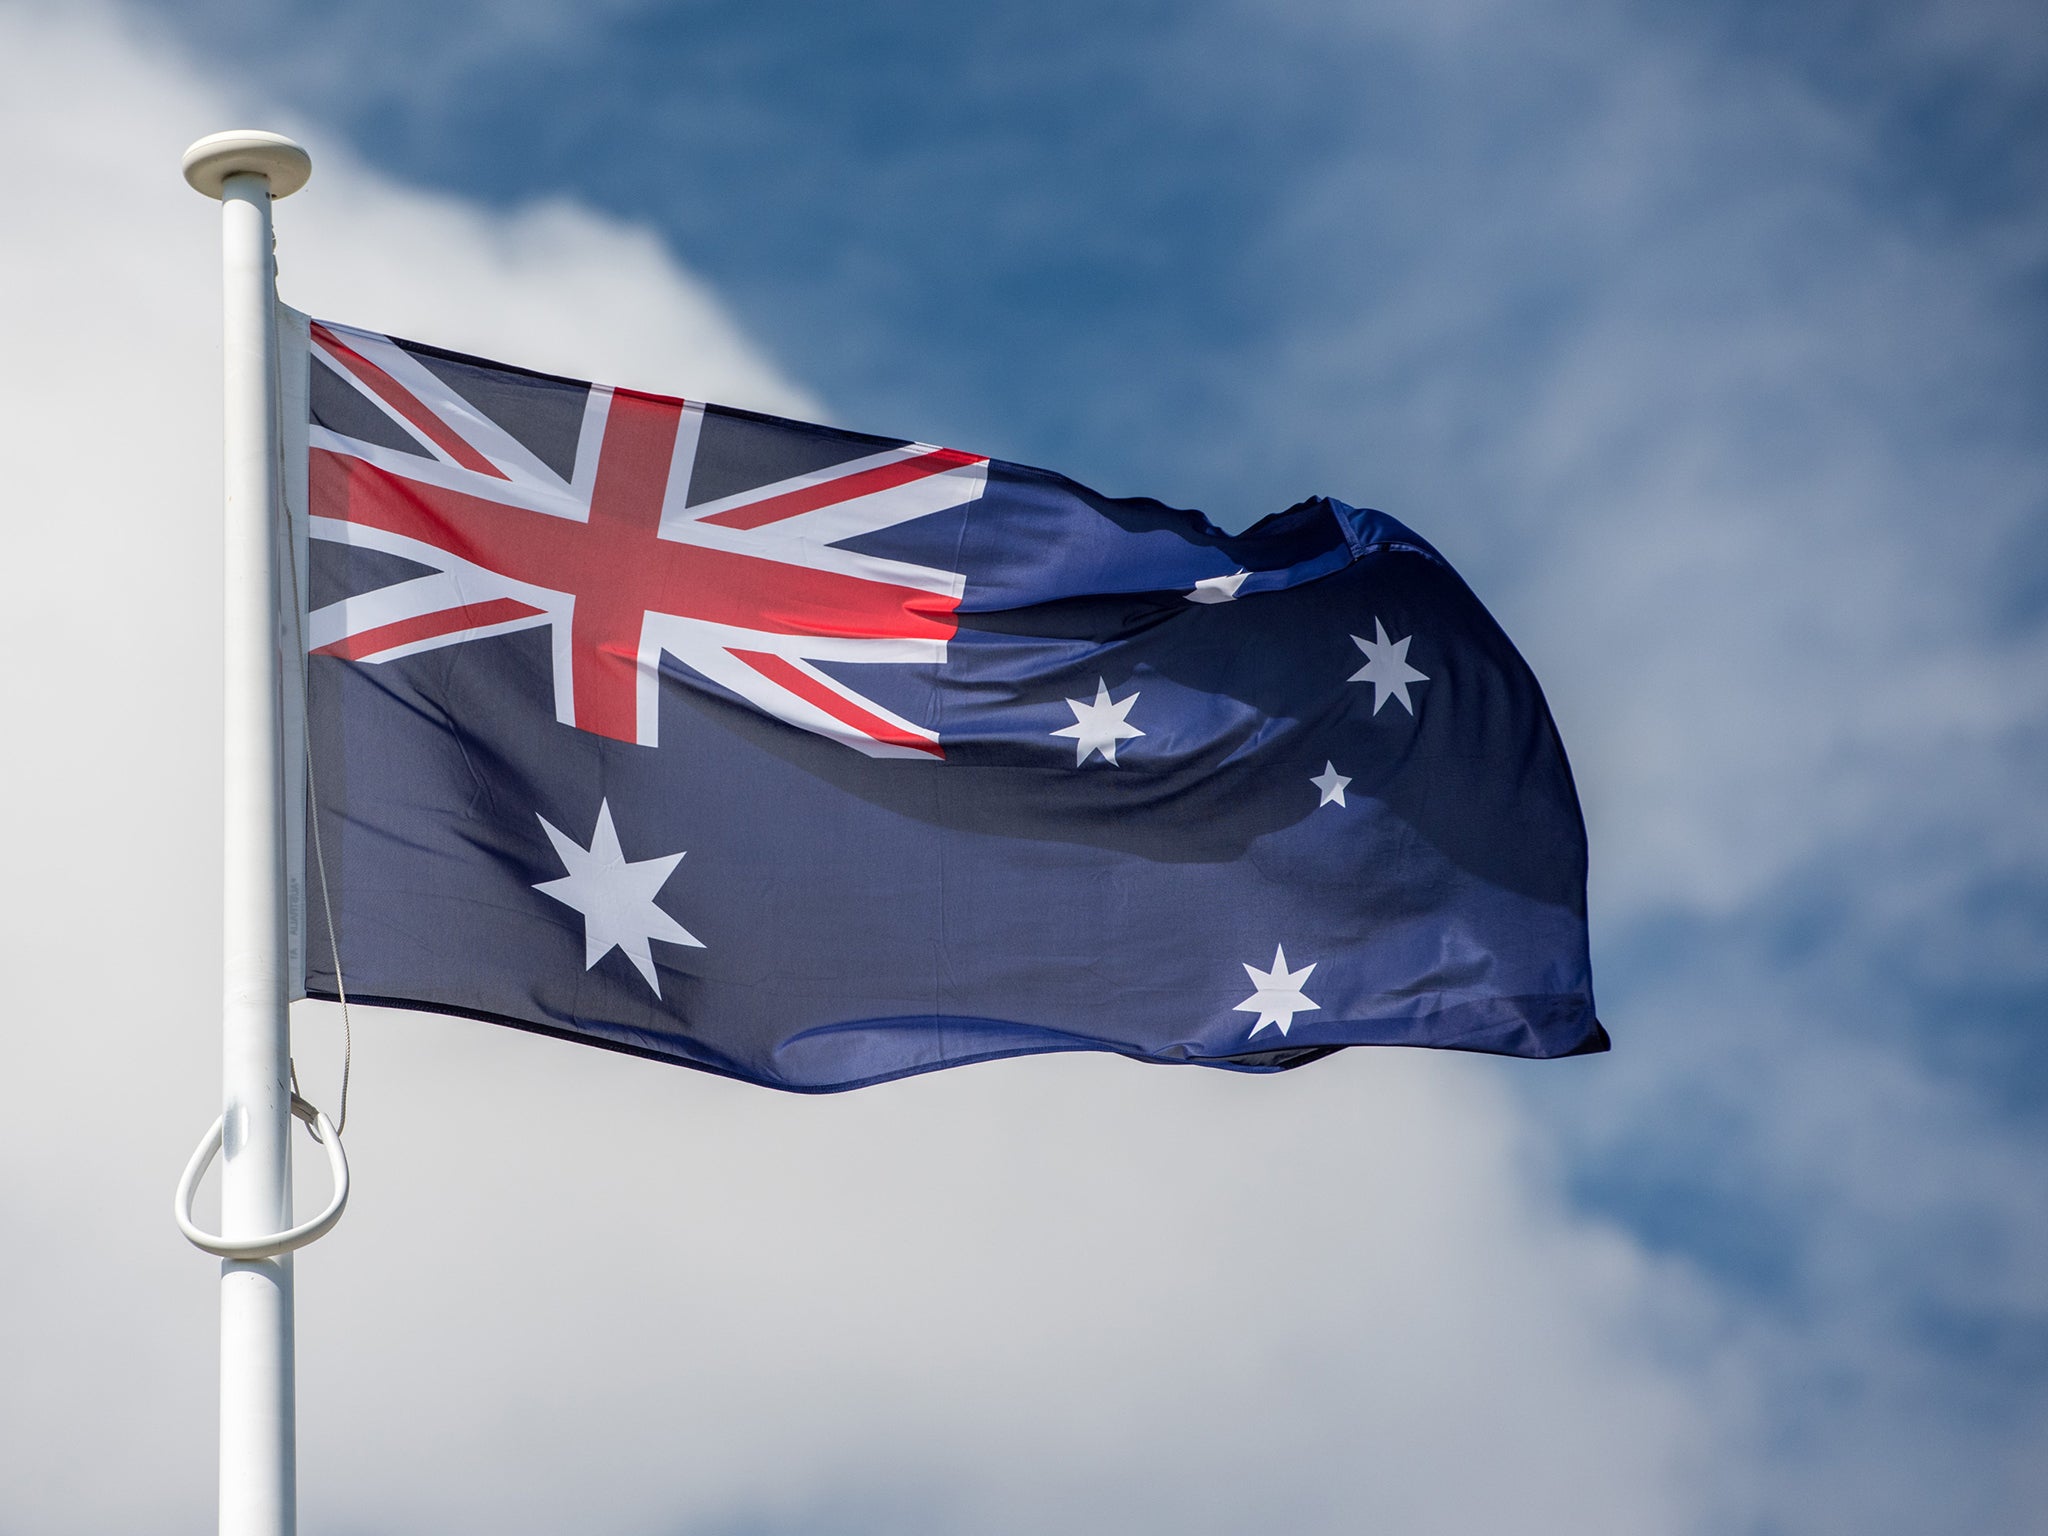 Australia Day is celebrated on 26 January, but some feel the date should be moved